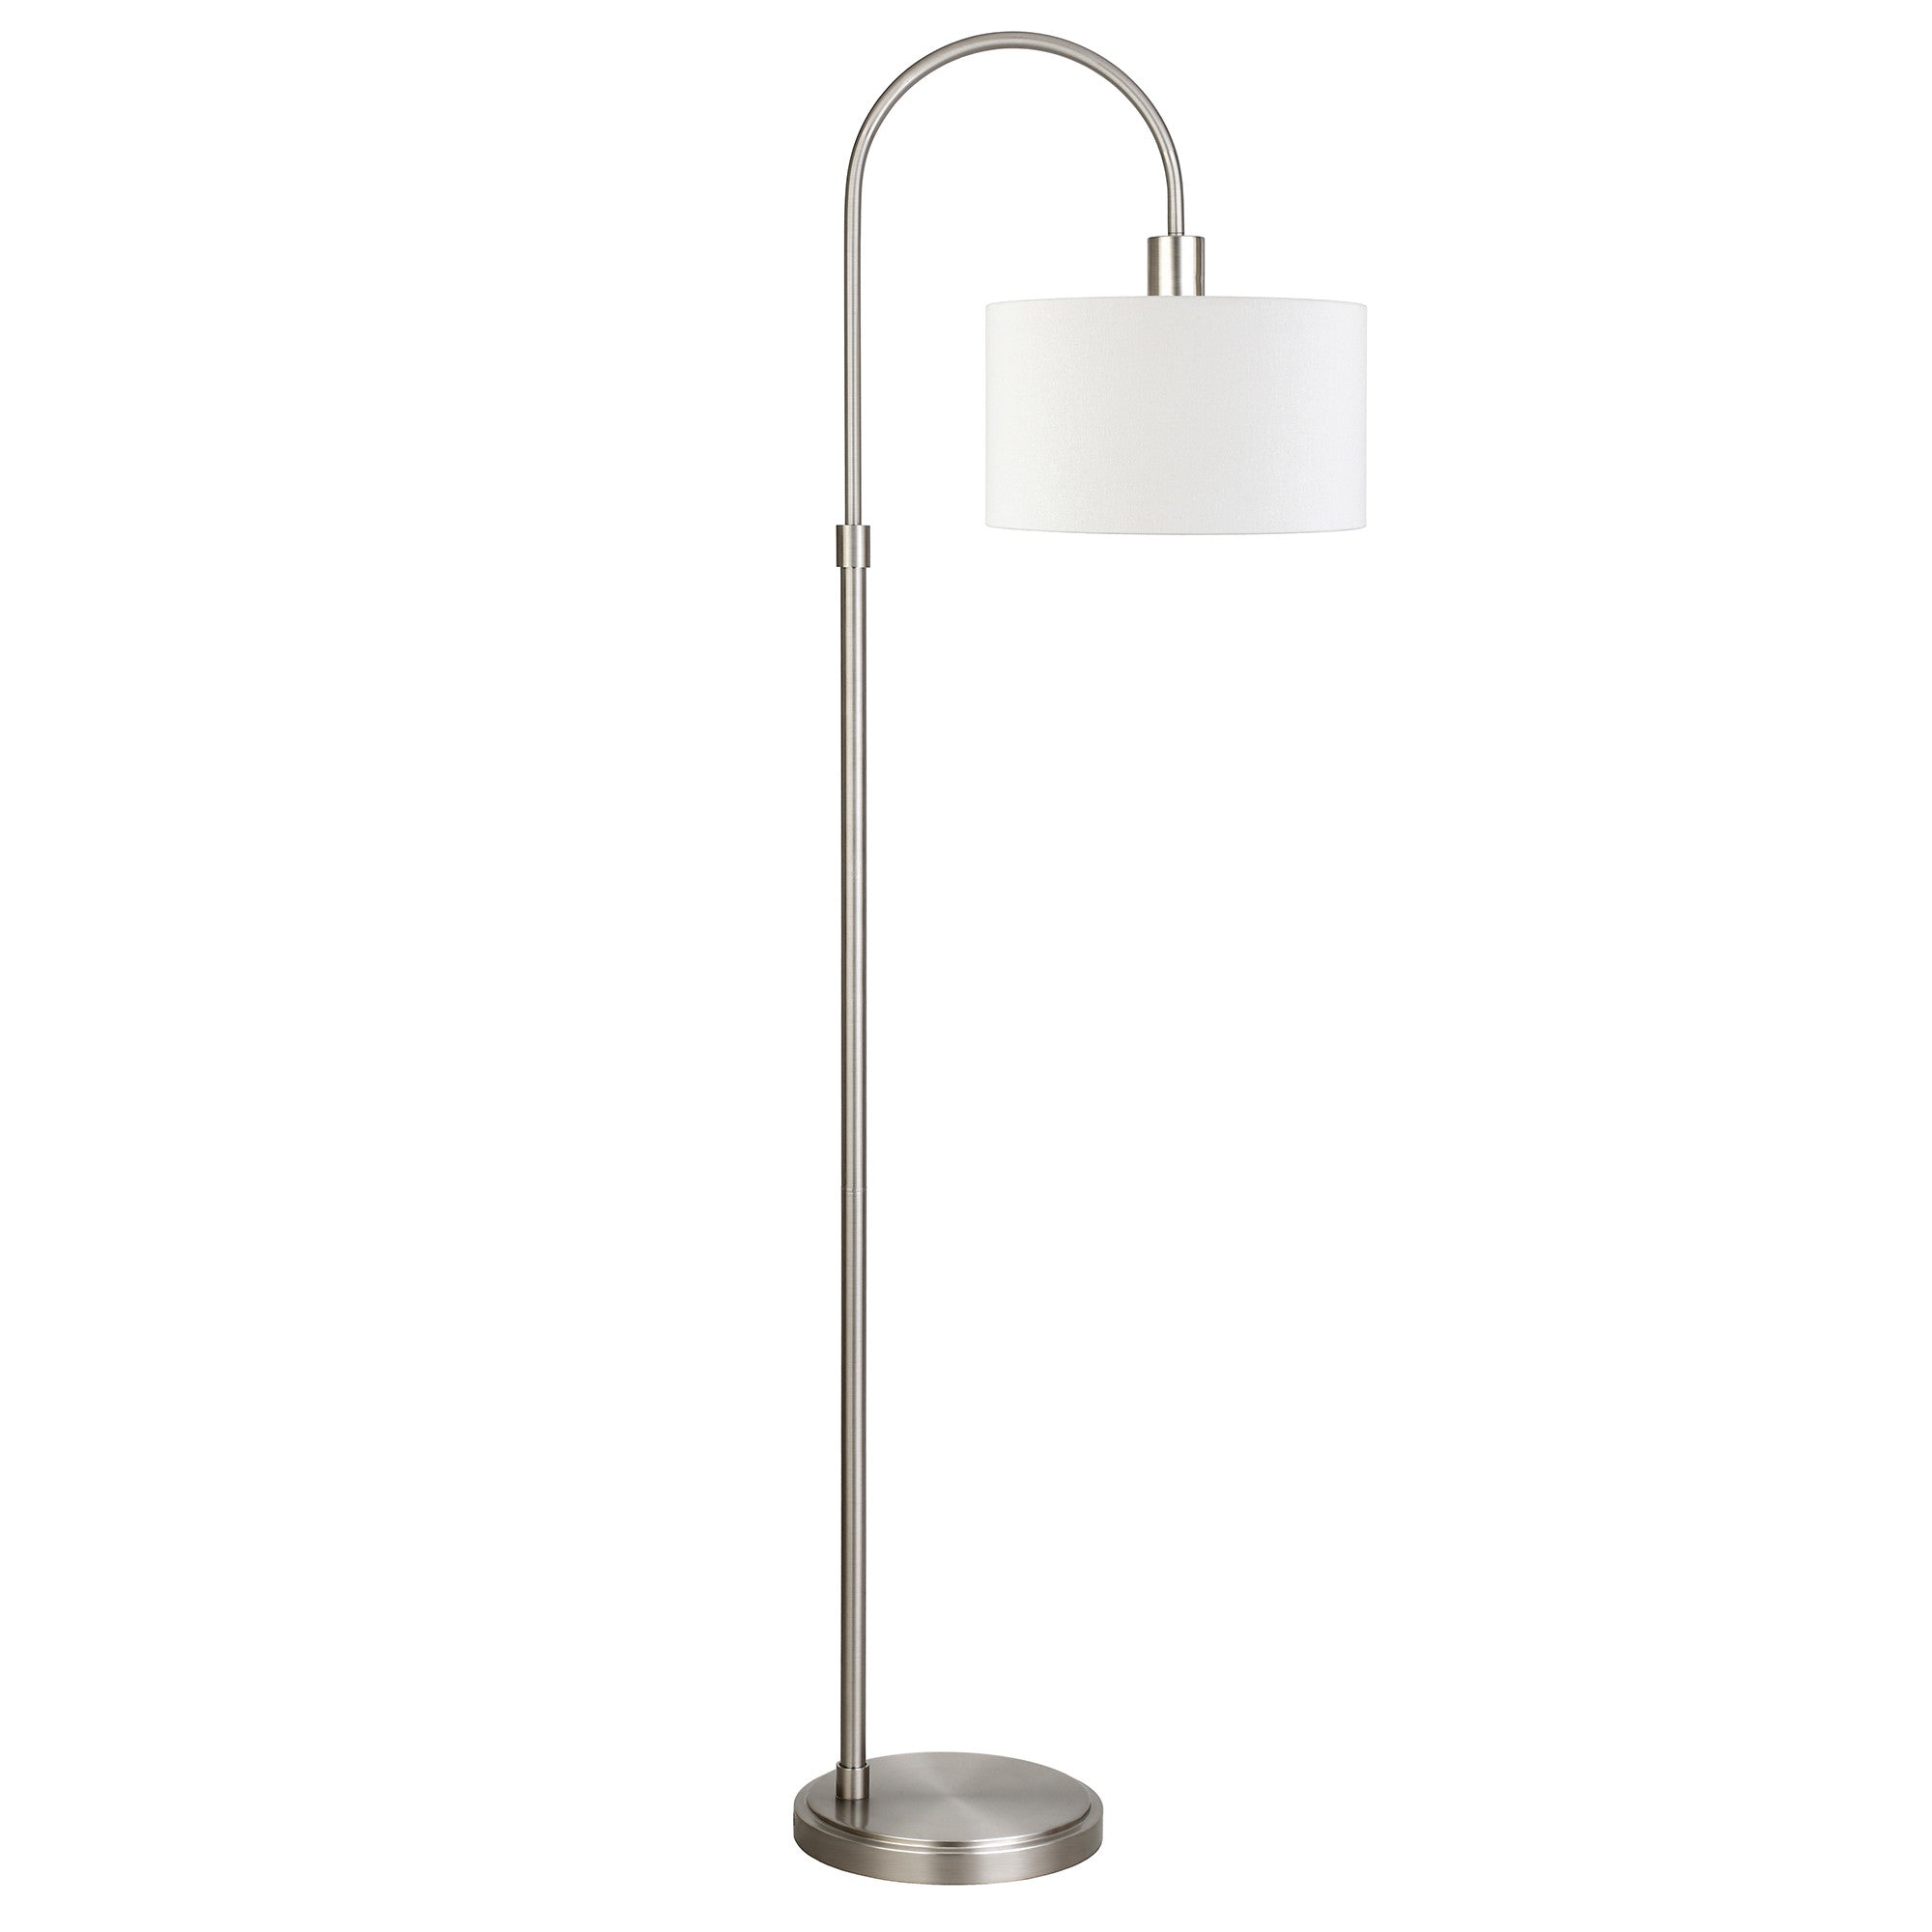 70" Nickel Arched Floor Lamp With White Frosted Glass Drum Shade